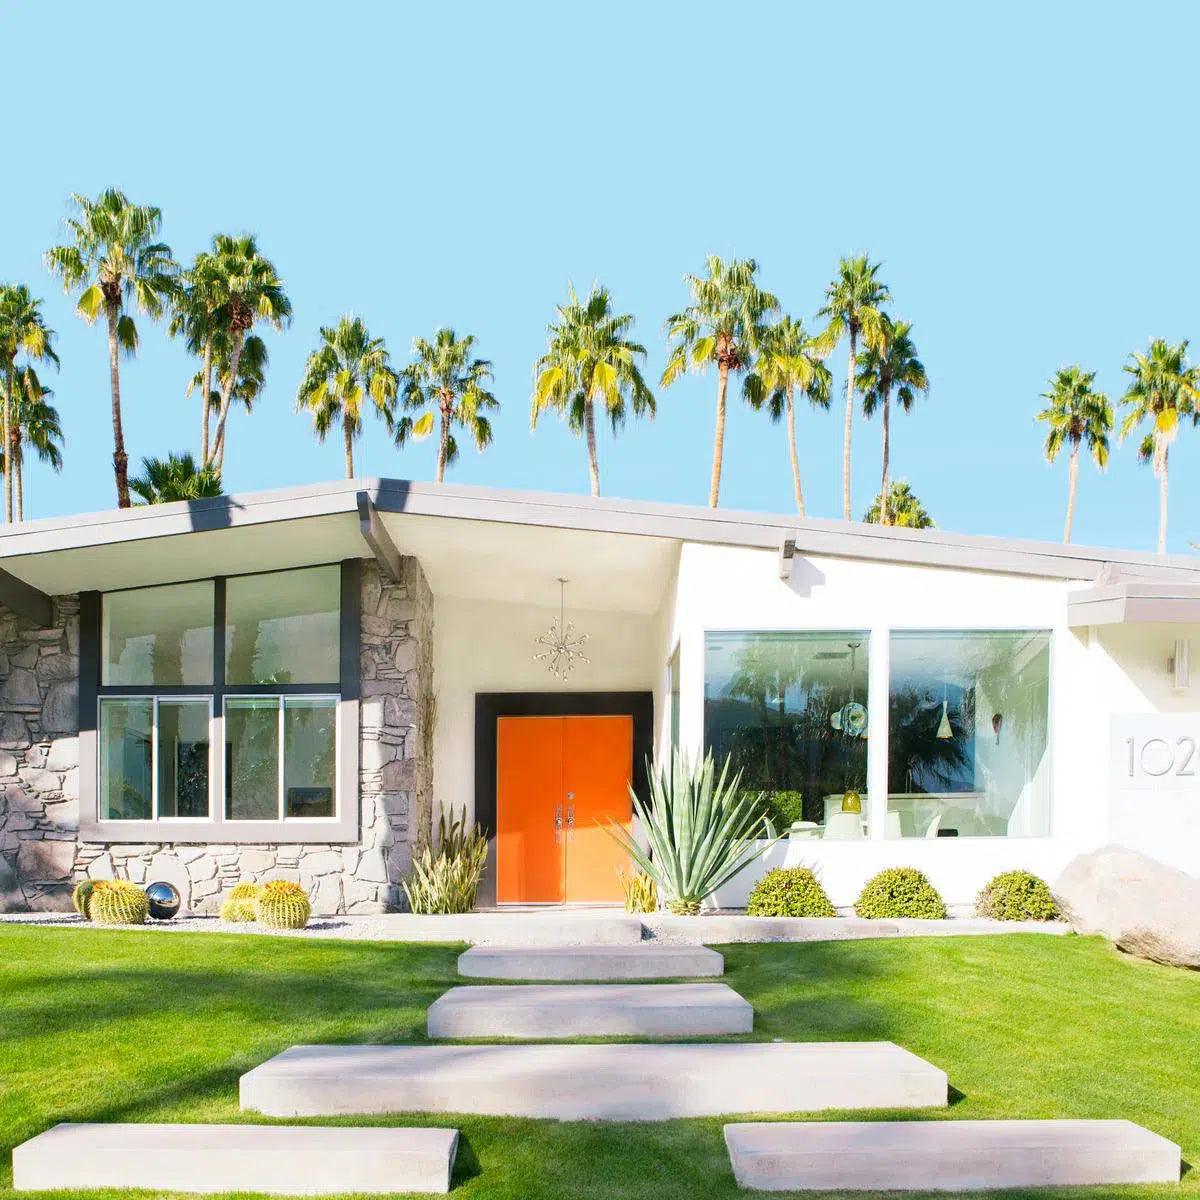 The Real Orange Doors of Palm Springs, by Kelly & Fred-PurePhoto